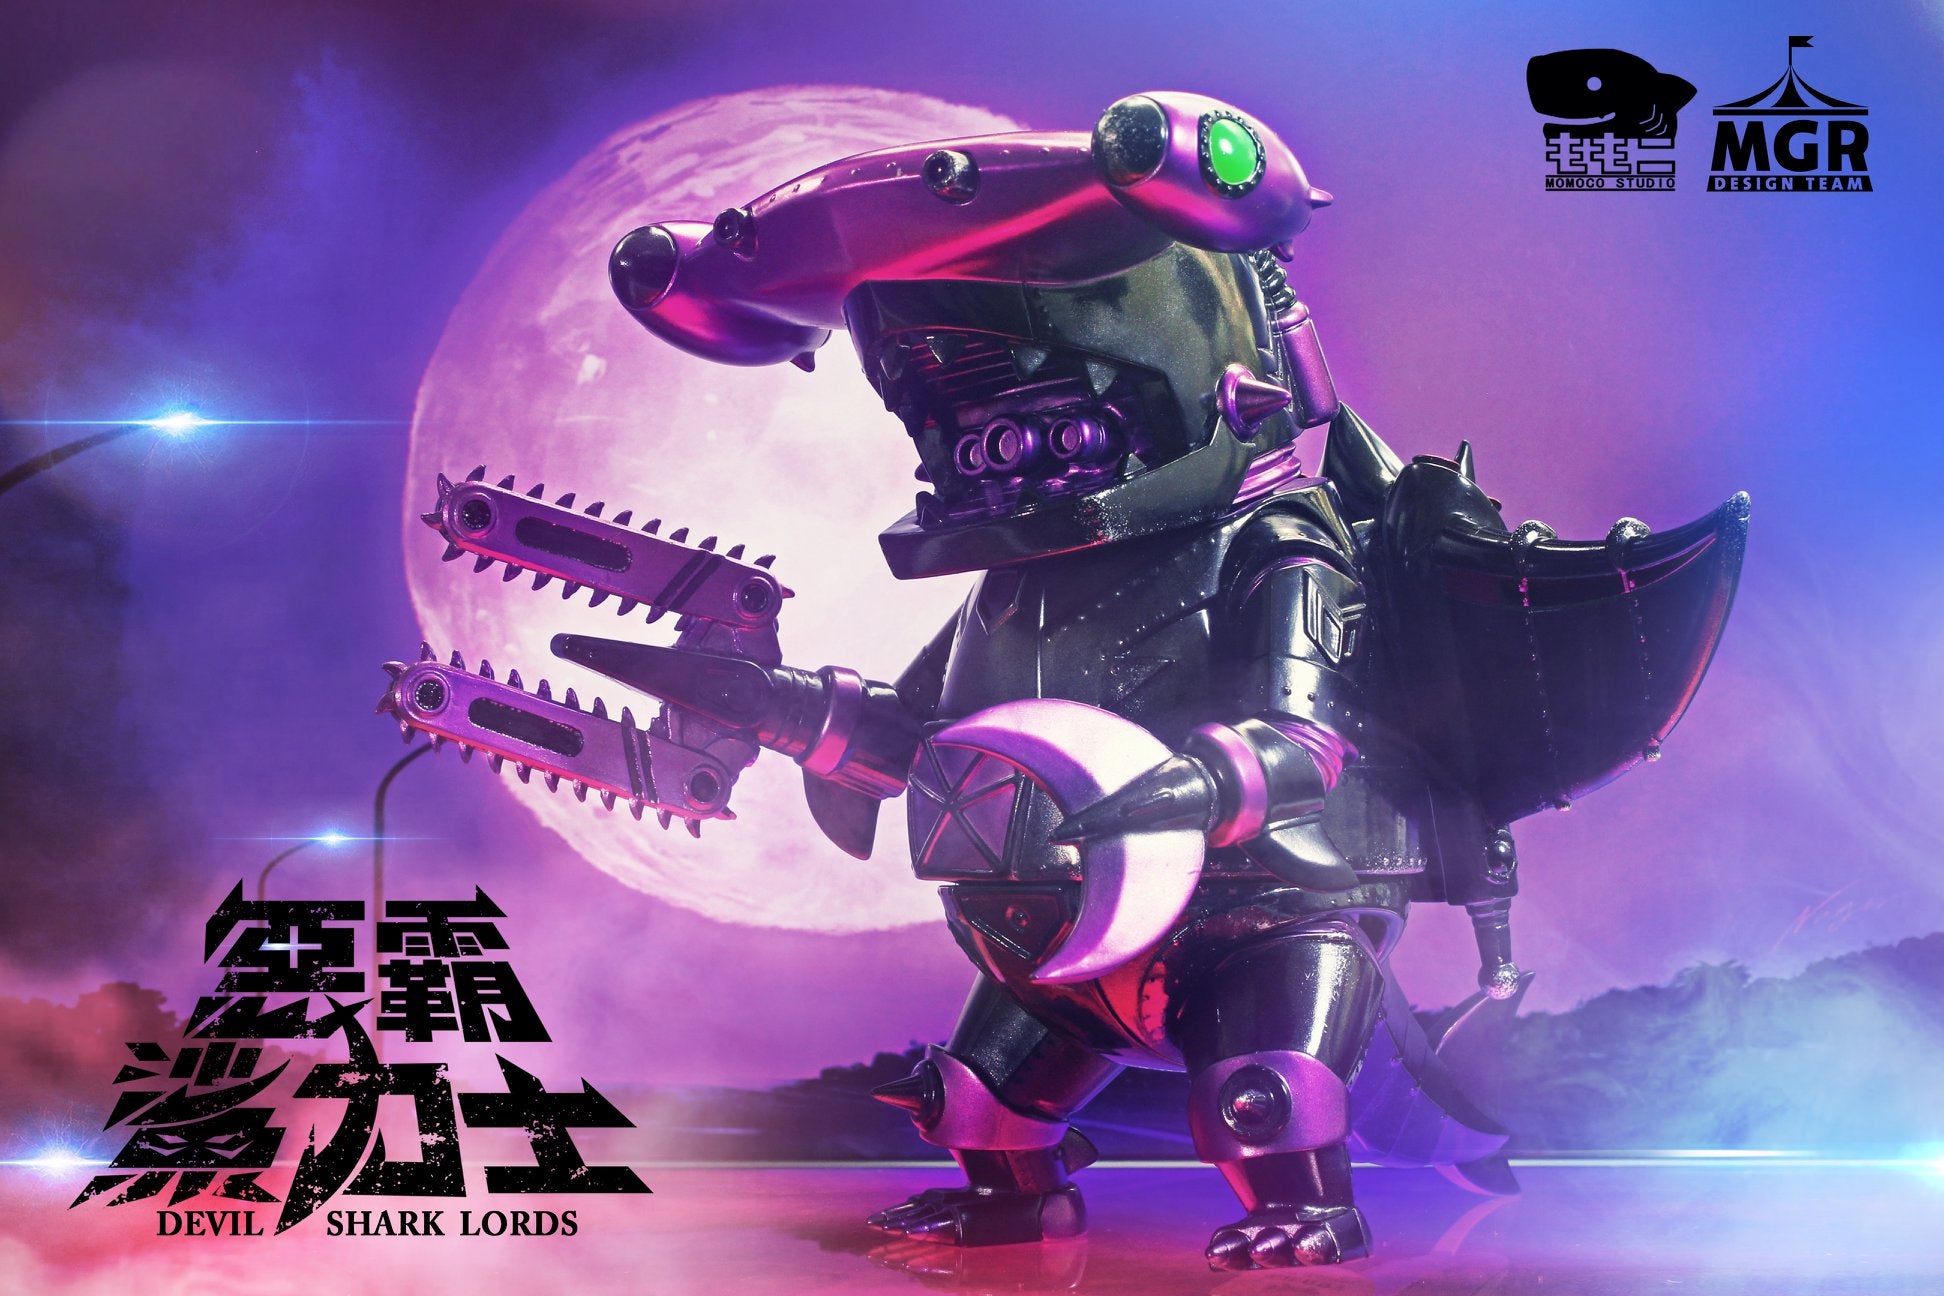 Toy robot with sword and saw, close-up of camera lens, logo of company, and bright light in sky, part of Devil Shark Lord Purple by Momoco.